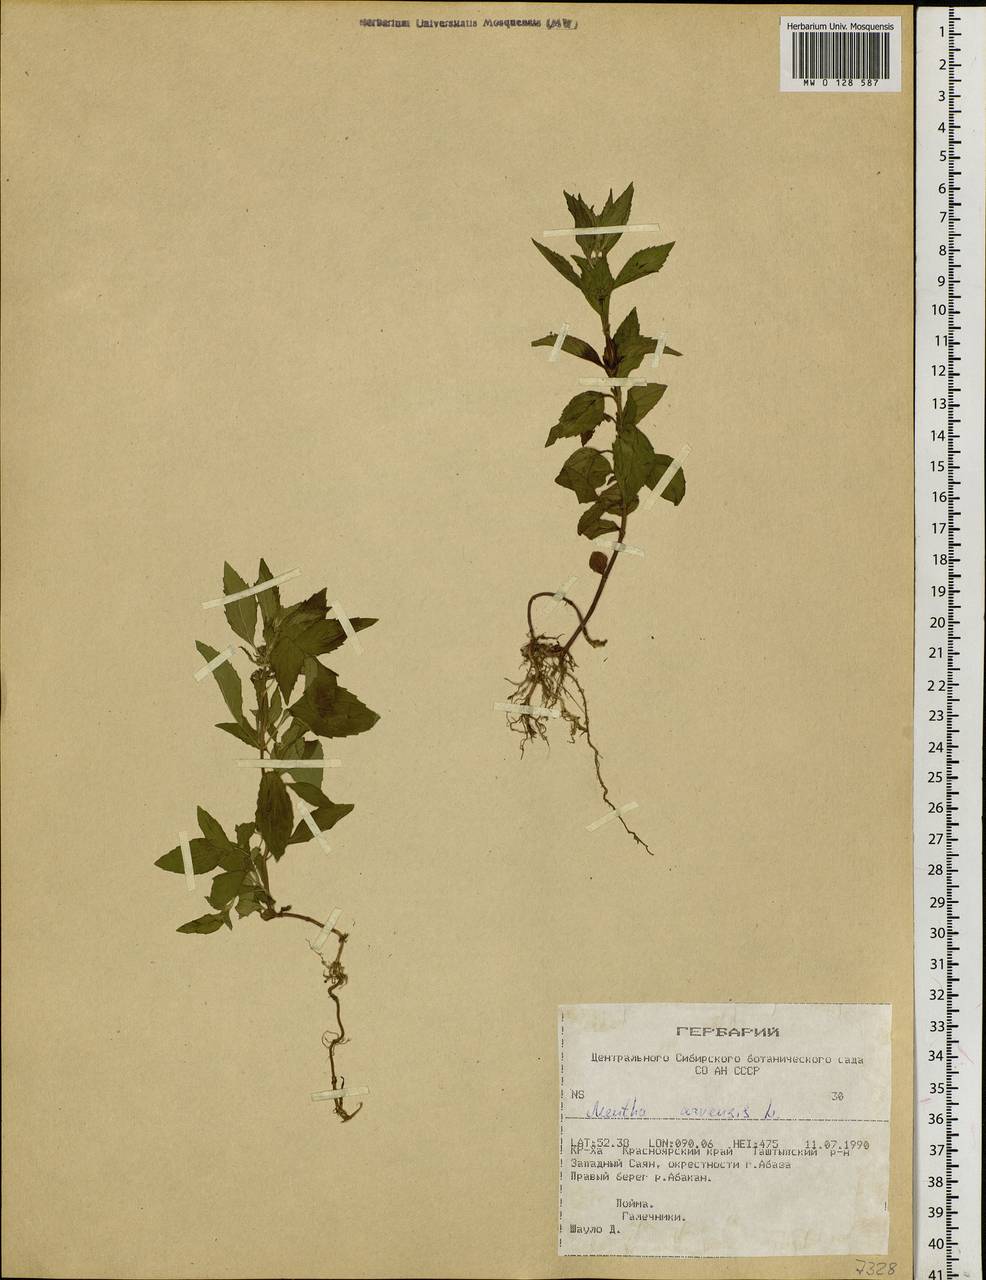 Mentha arvensis L., Siberia, Altai & Sayany Mountains (S2) (Russia)